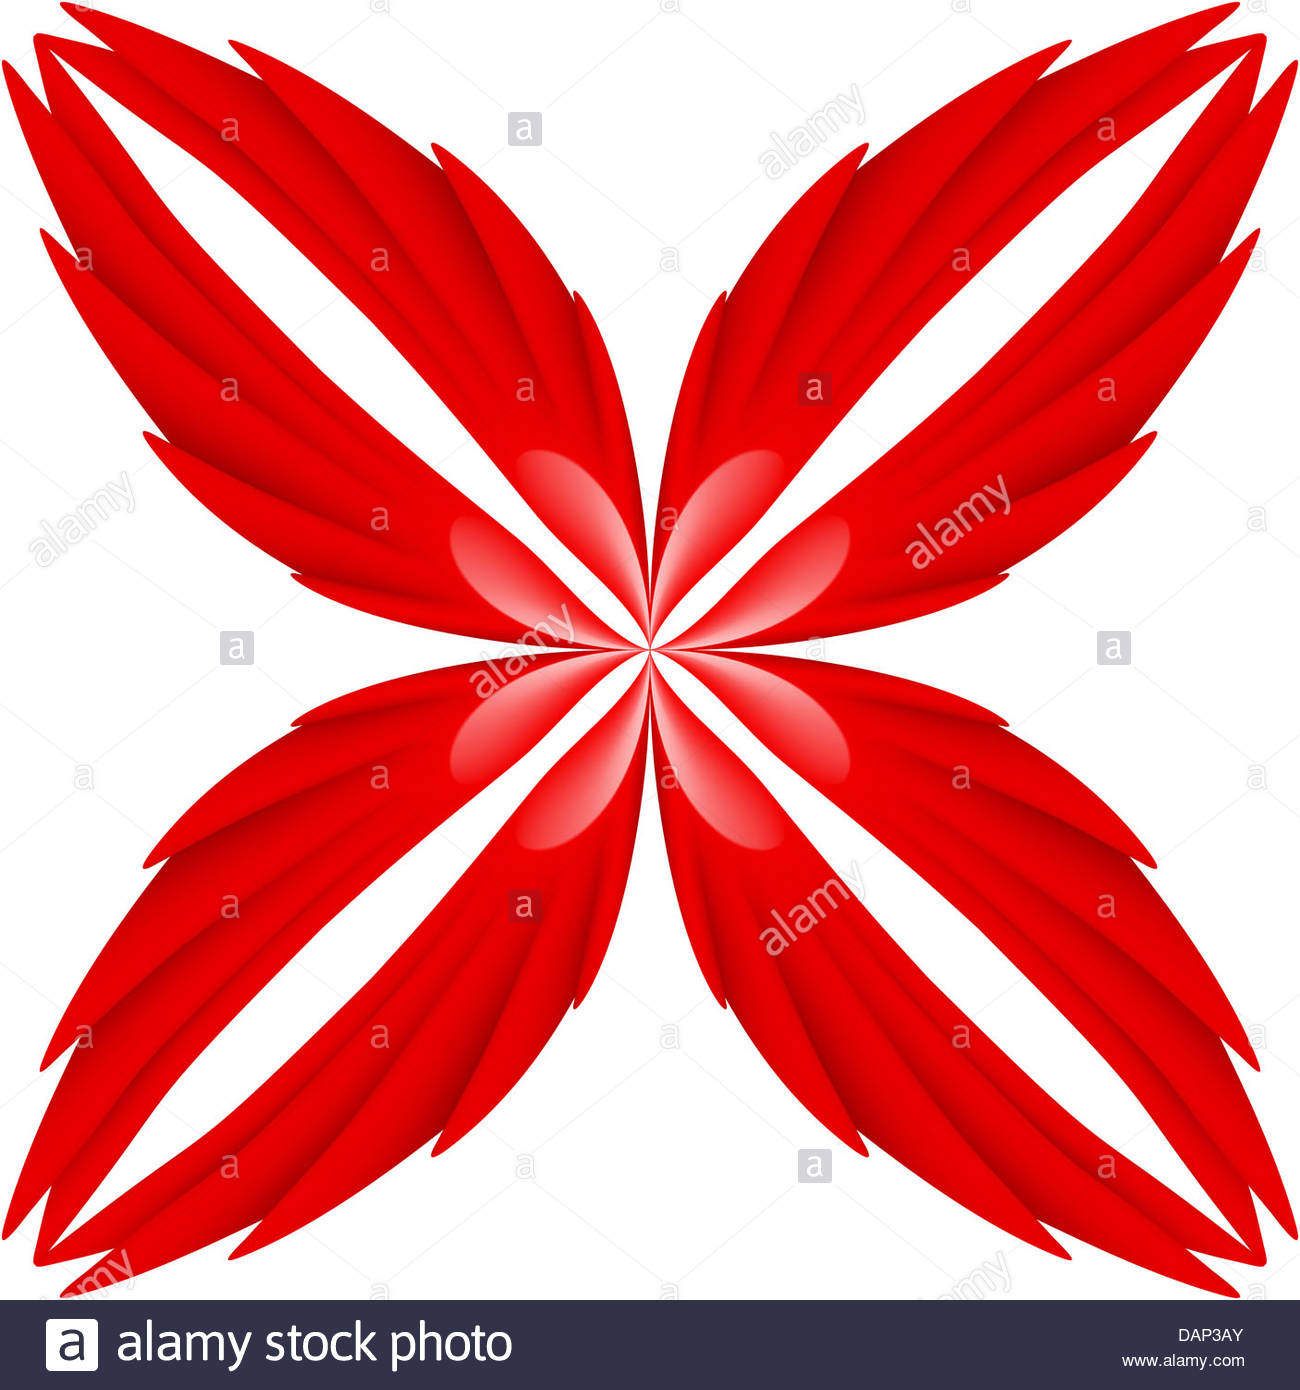 Red Wings Pattern Illustration On White Background Stock Photo